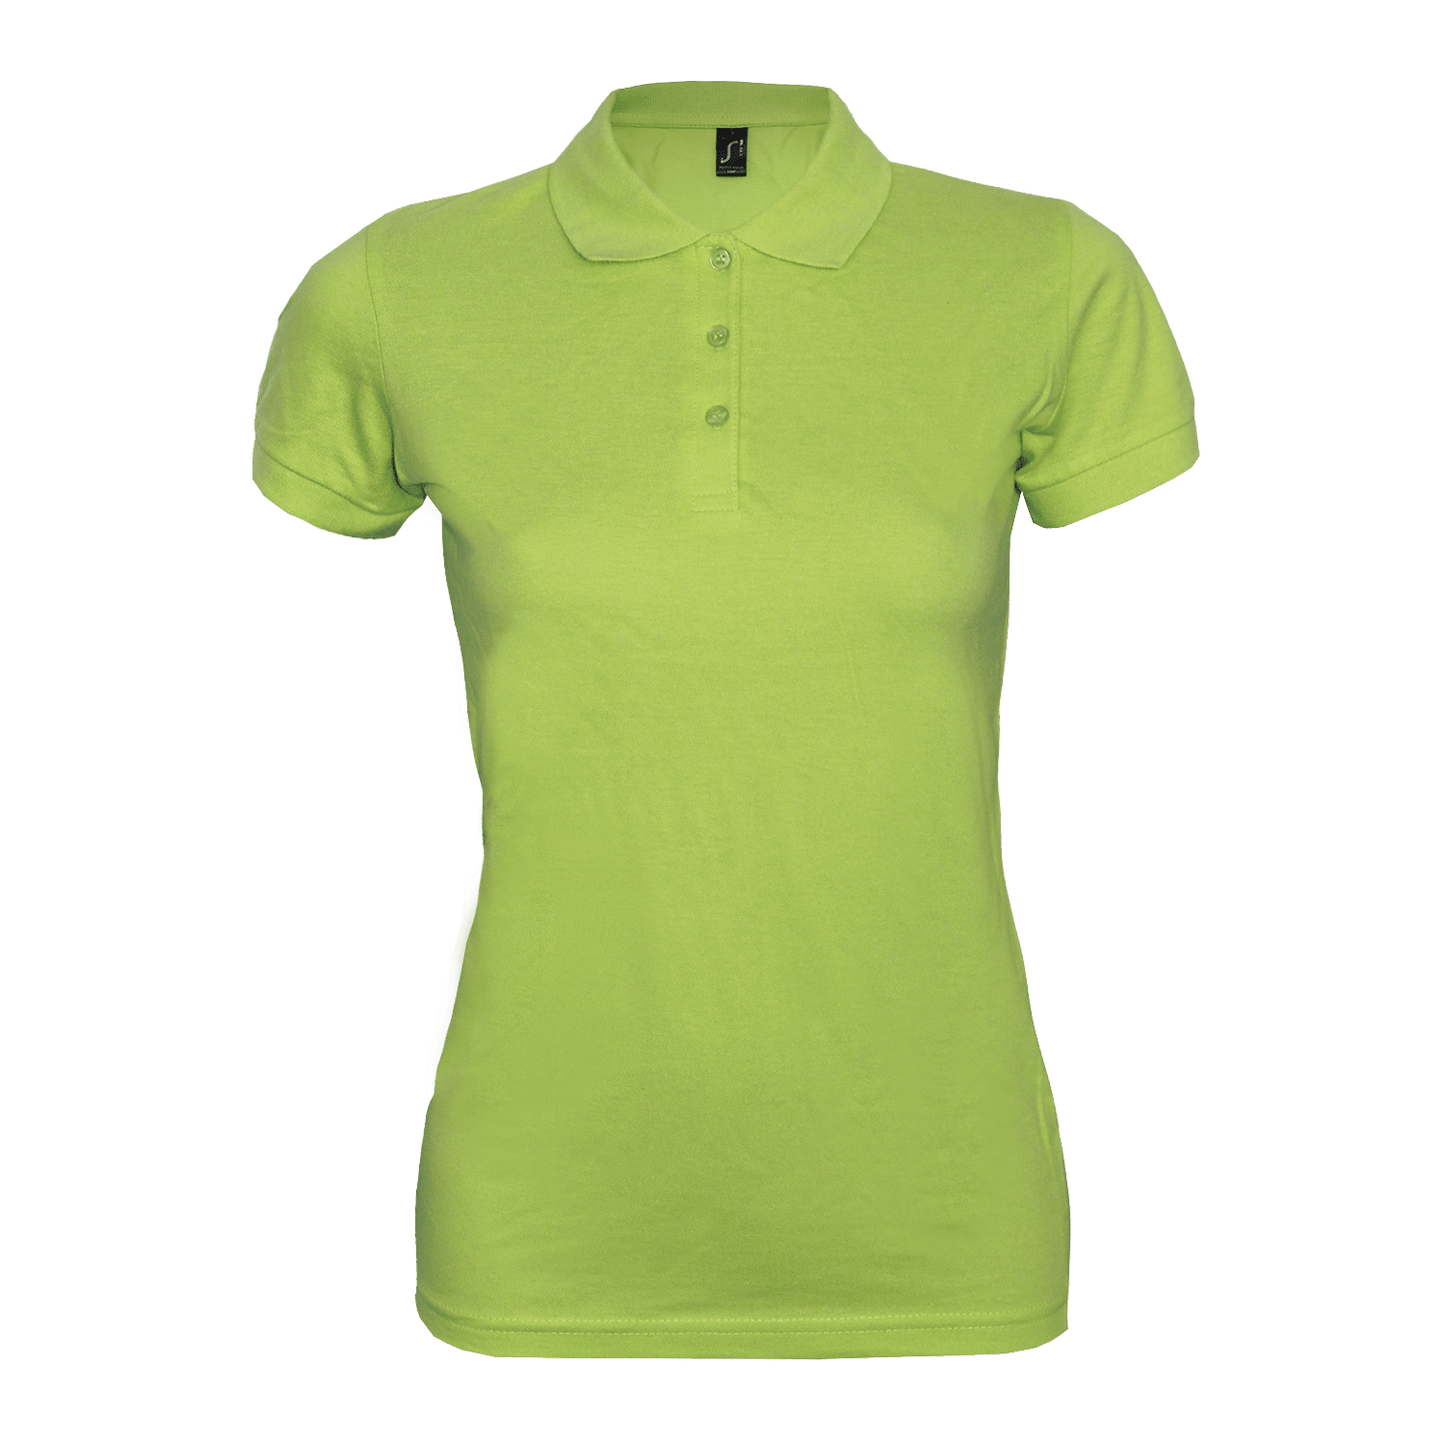 Sols "Perfect" Girly Polo